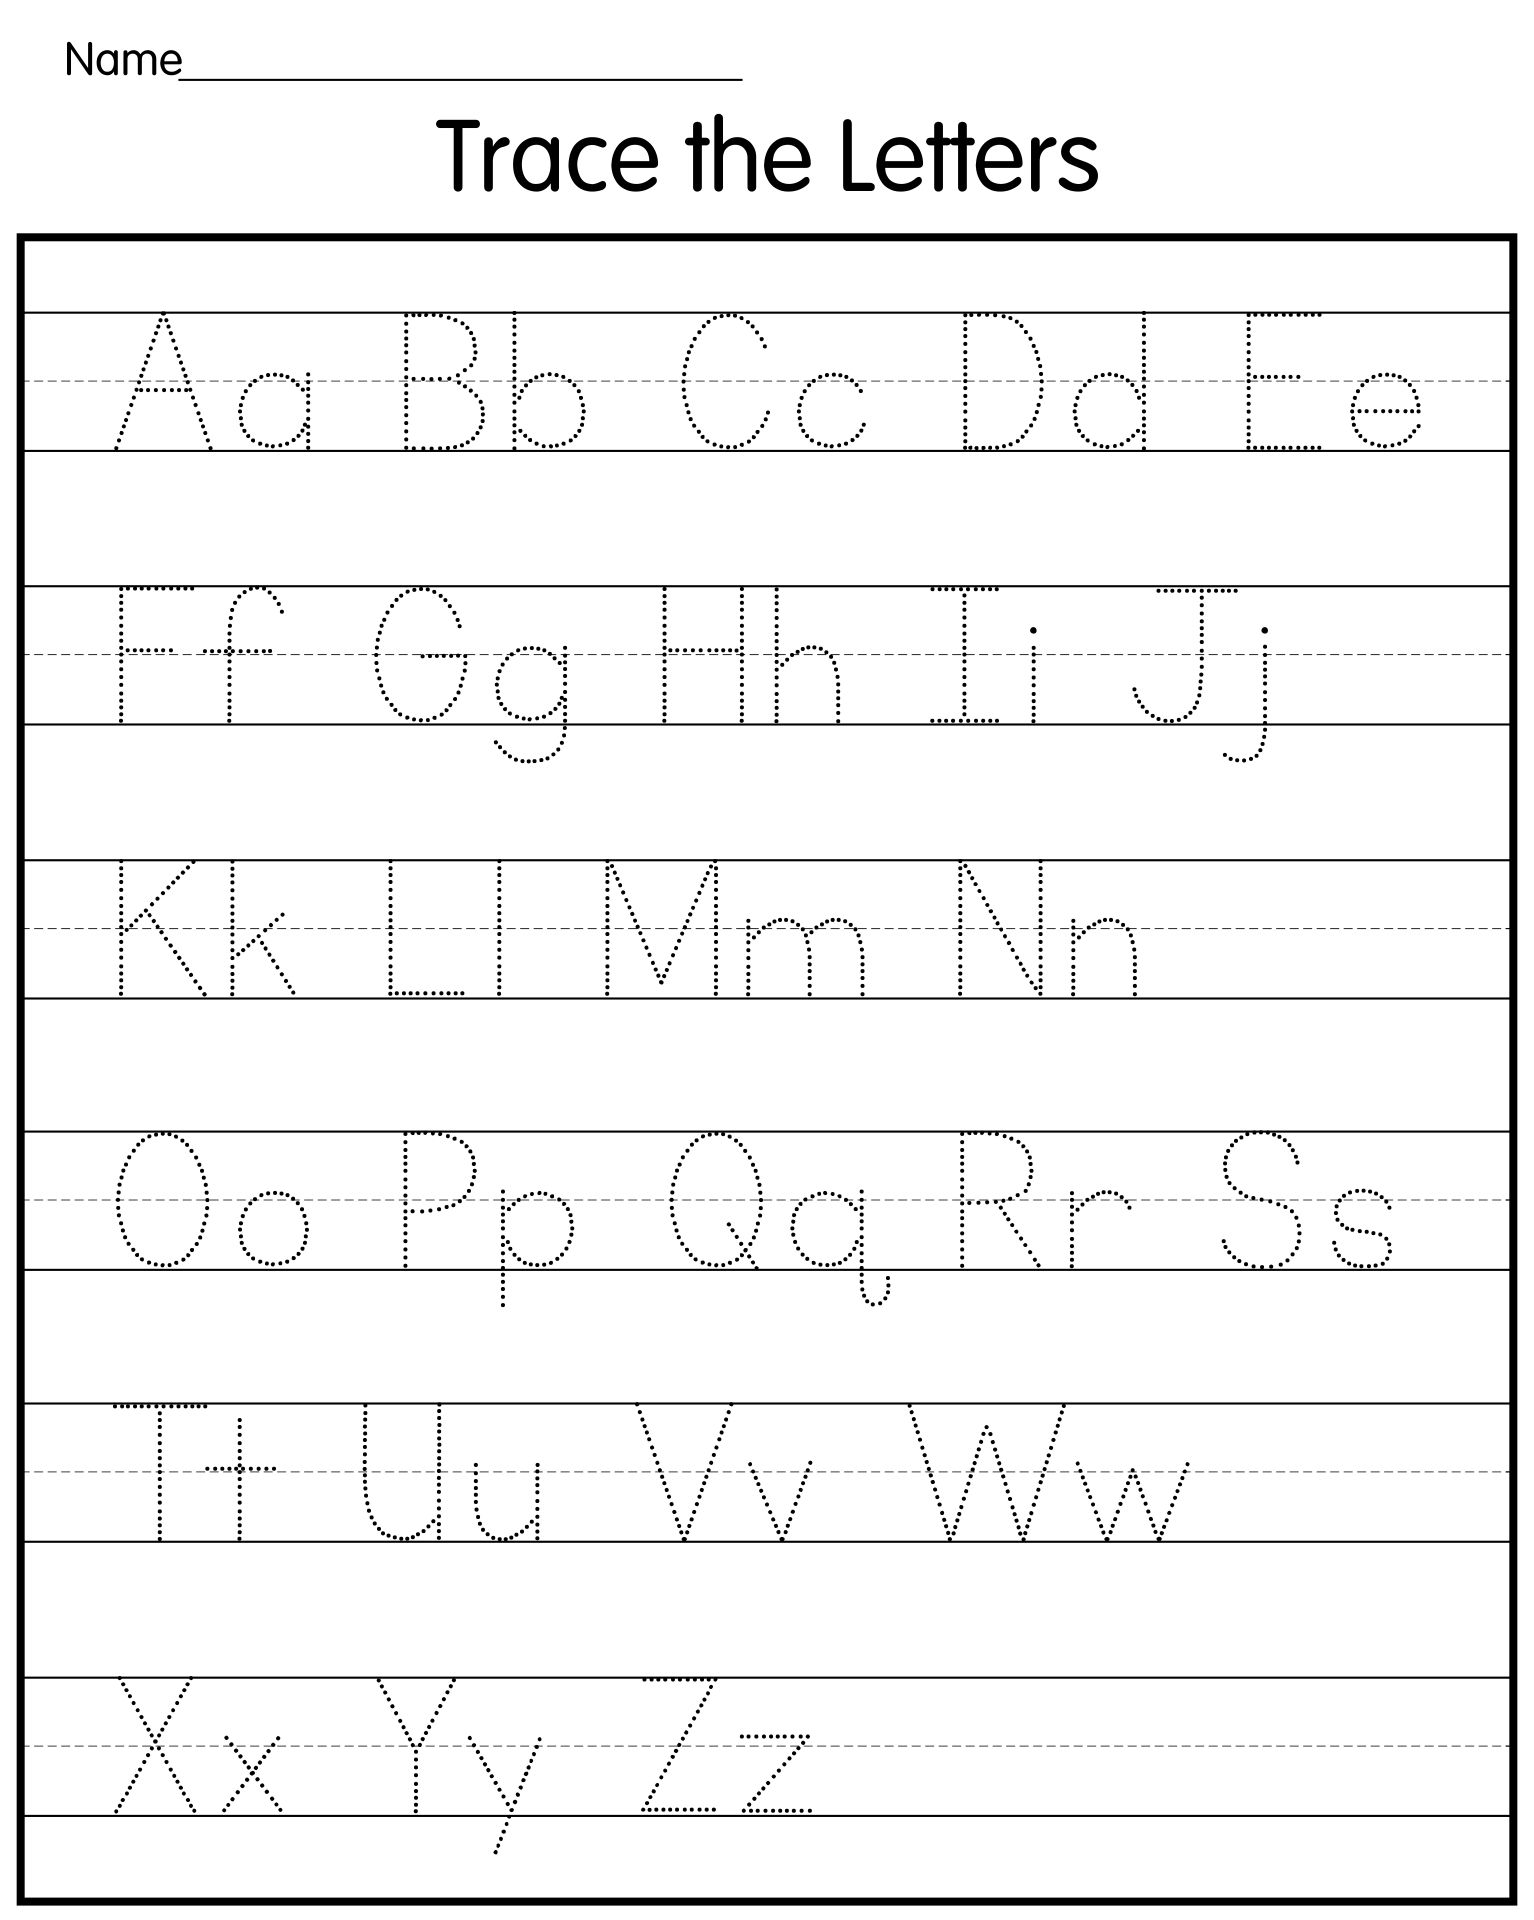 tracing-alphabet-letters-worksheets